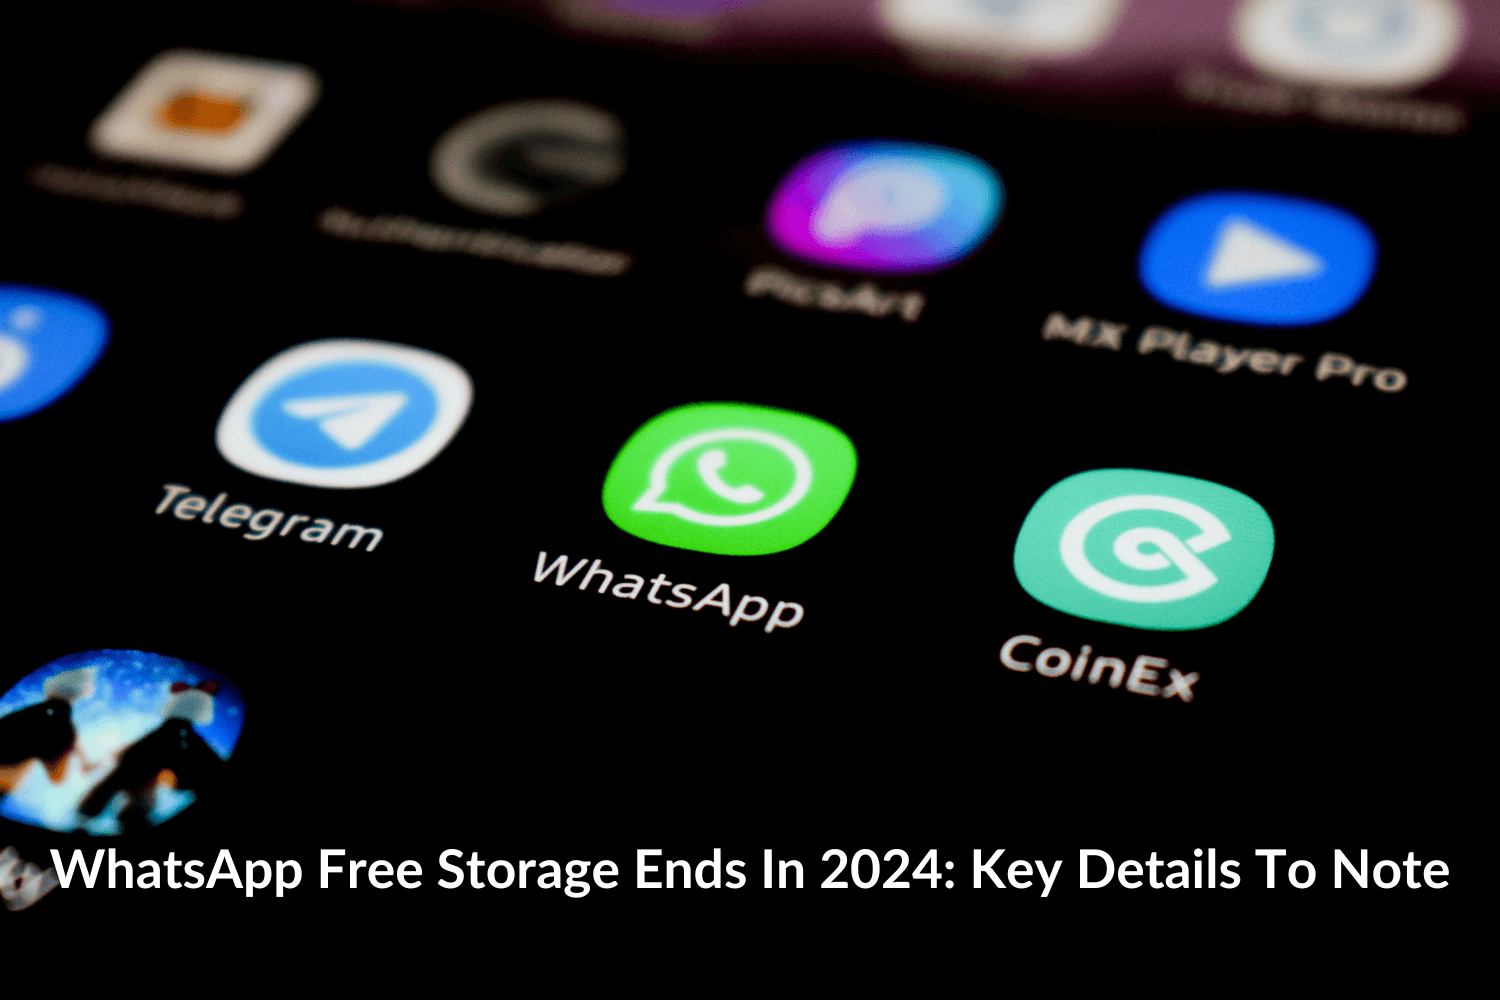 WhatsApp Free Storage Ends In 2024 Key Details To Note